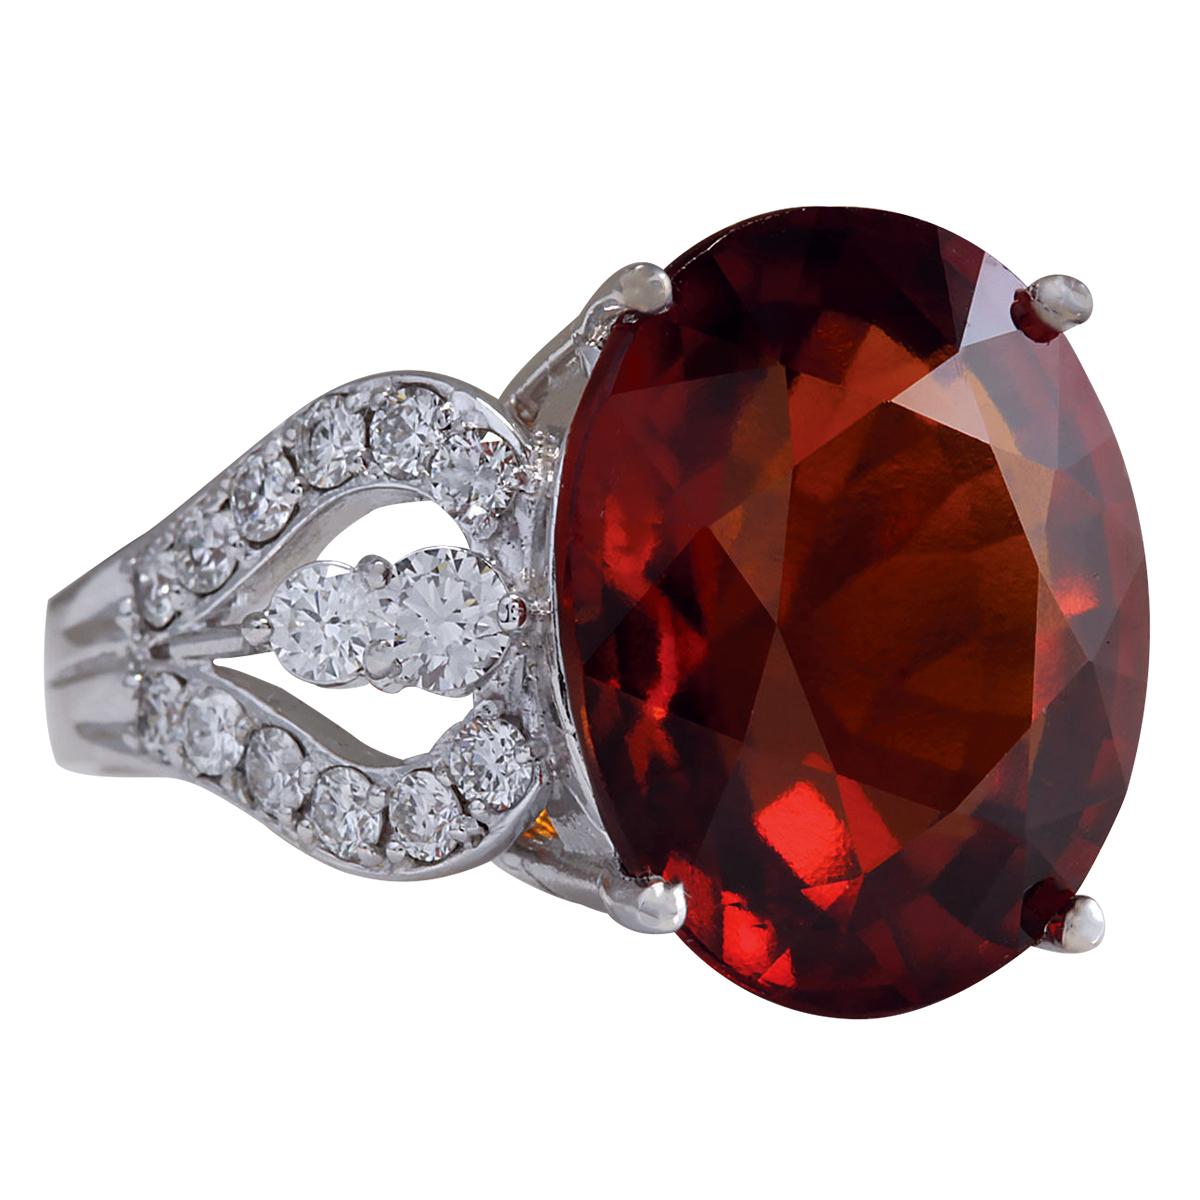 Introducing our exquisite 14 Karat White Gold Diamond Ring featuring a magnificent 19.81 Carat Garnet, stamped with authenticity. Crafted to perfection, this ring embodies elegance and opulence. Weighing 9.0 grams, it showcases a breathtaking Garnet